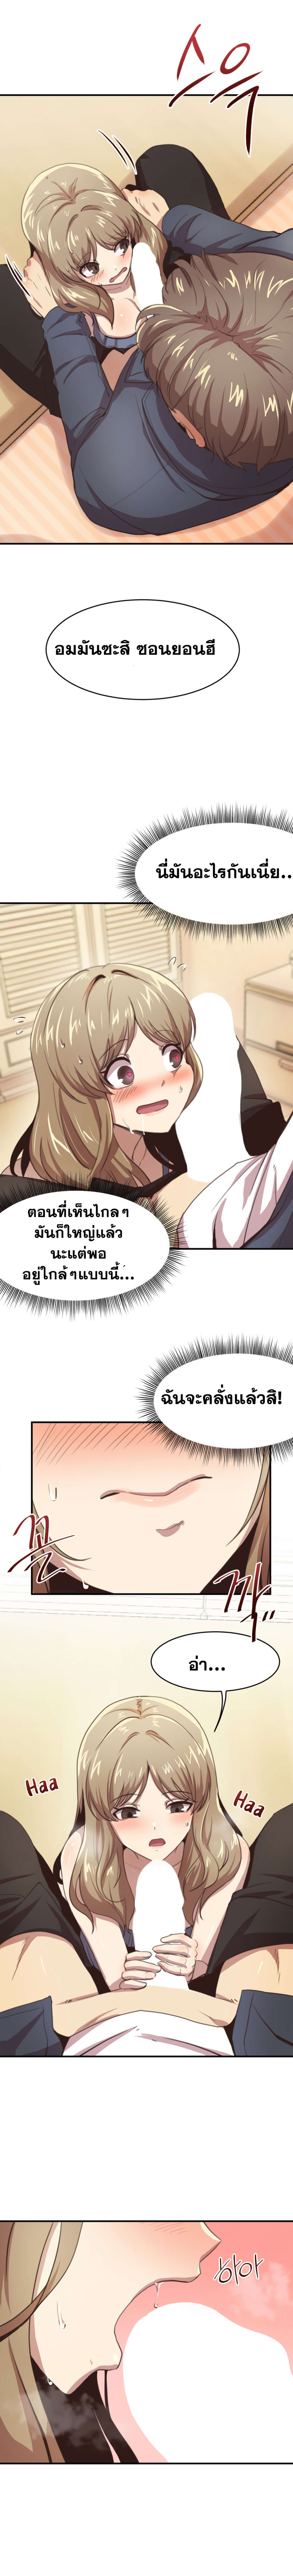 With My Brother’s Friends ตอนที่ 3 ภาพ 9